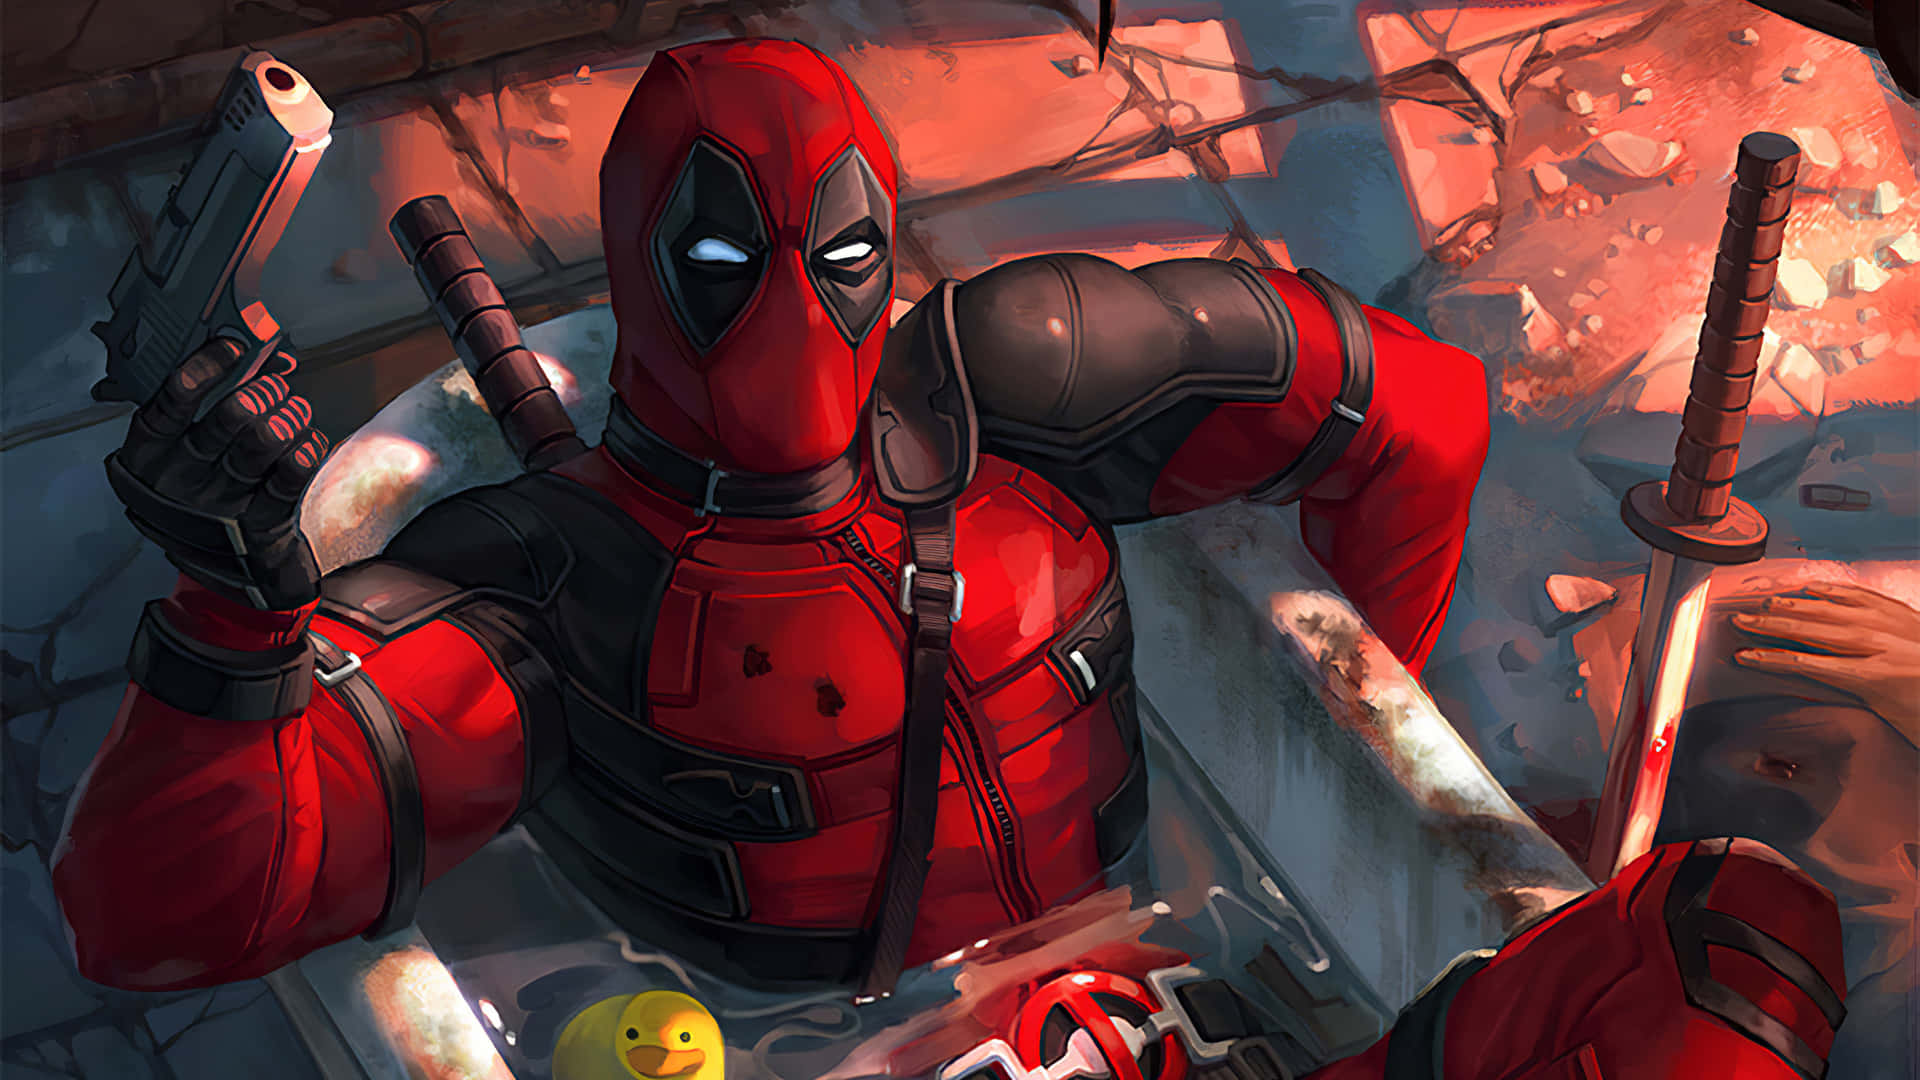 Deadpool - the Merc with a Mouth